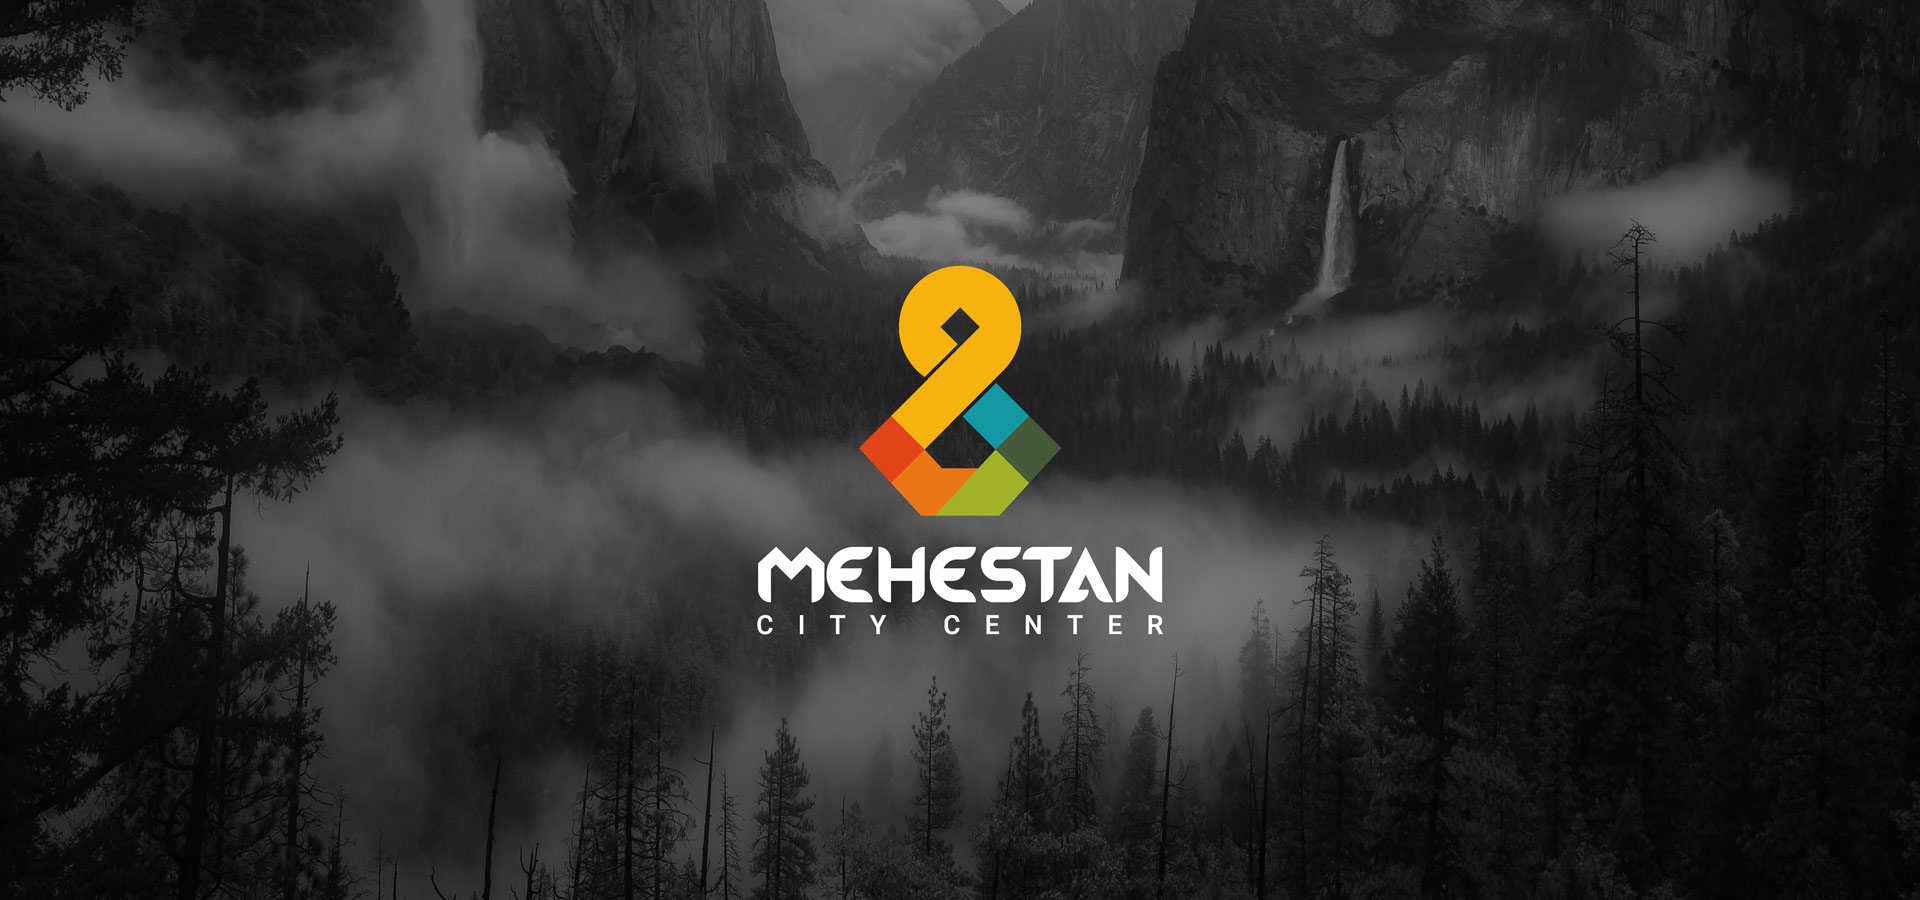 brand logo design for mehestan by Zhahoo Creative Agency.